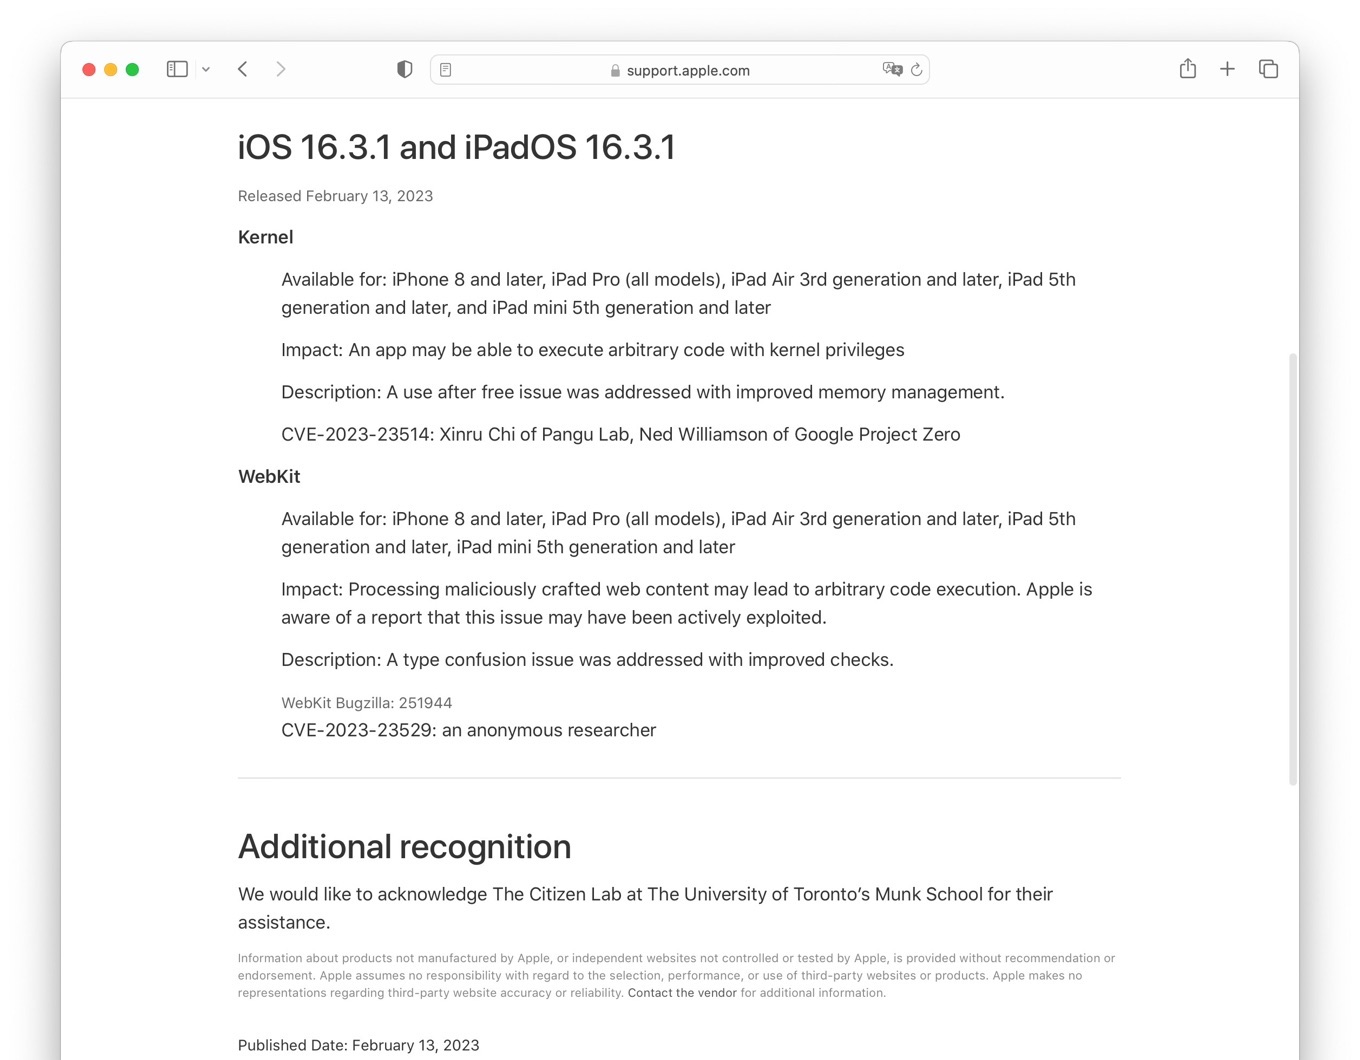 About the security content of iOS 16.3.1 and iPadOS 16.3.1 